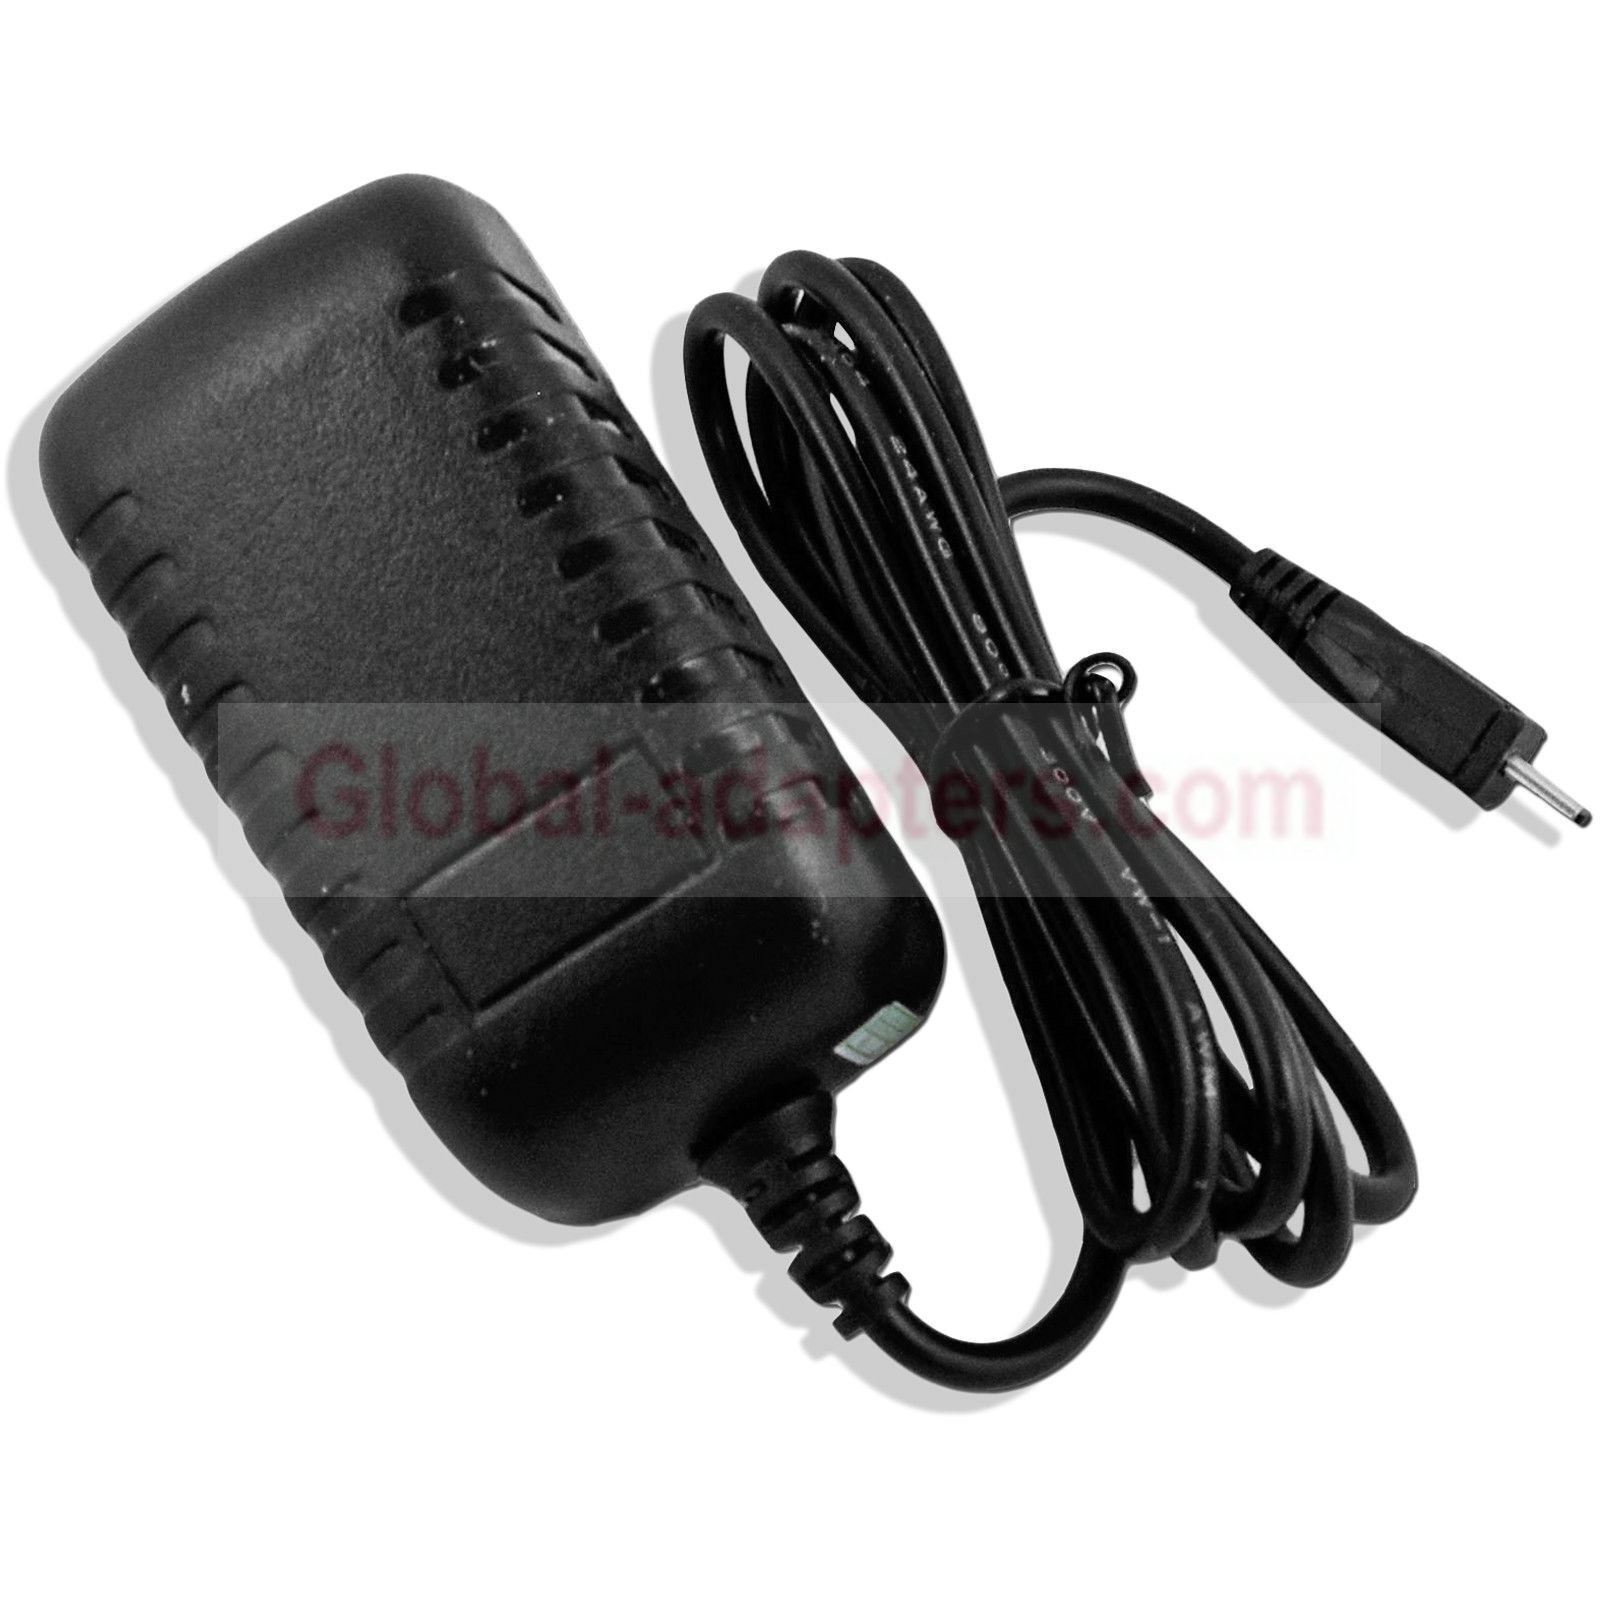 New 5V 2A RCA 8 Apollo RCT6573W23 Tablet Computer Power Supply AC ADAPTER